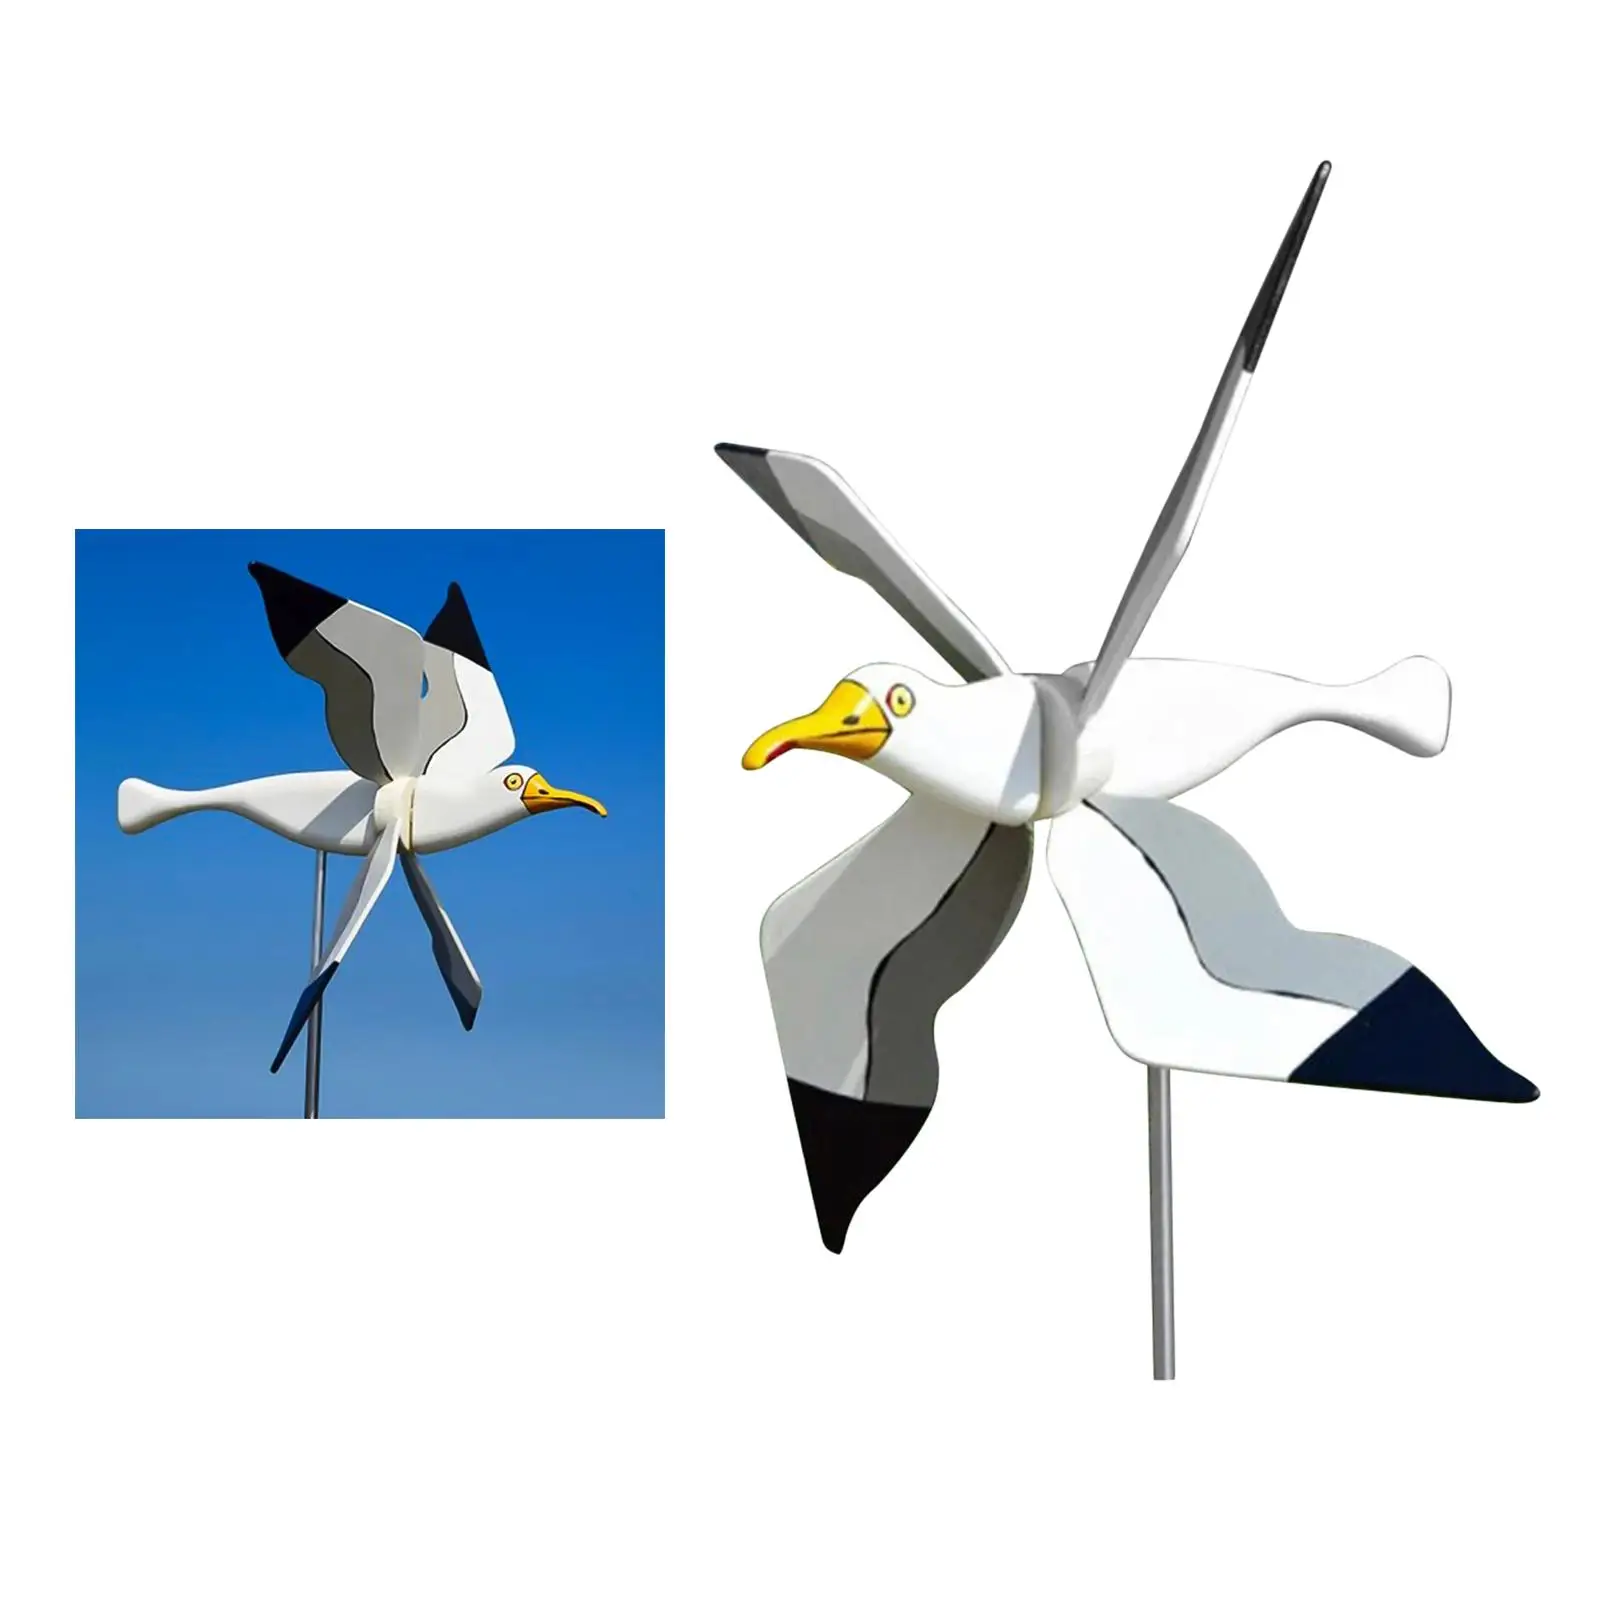 Windmill Garden Ornaments Toys for Lawn Decoration Outdoor Garden Decoration